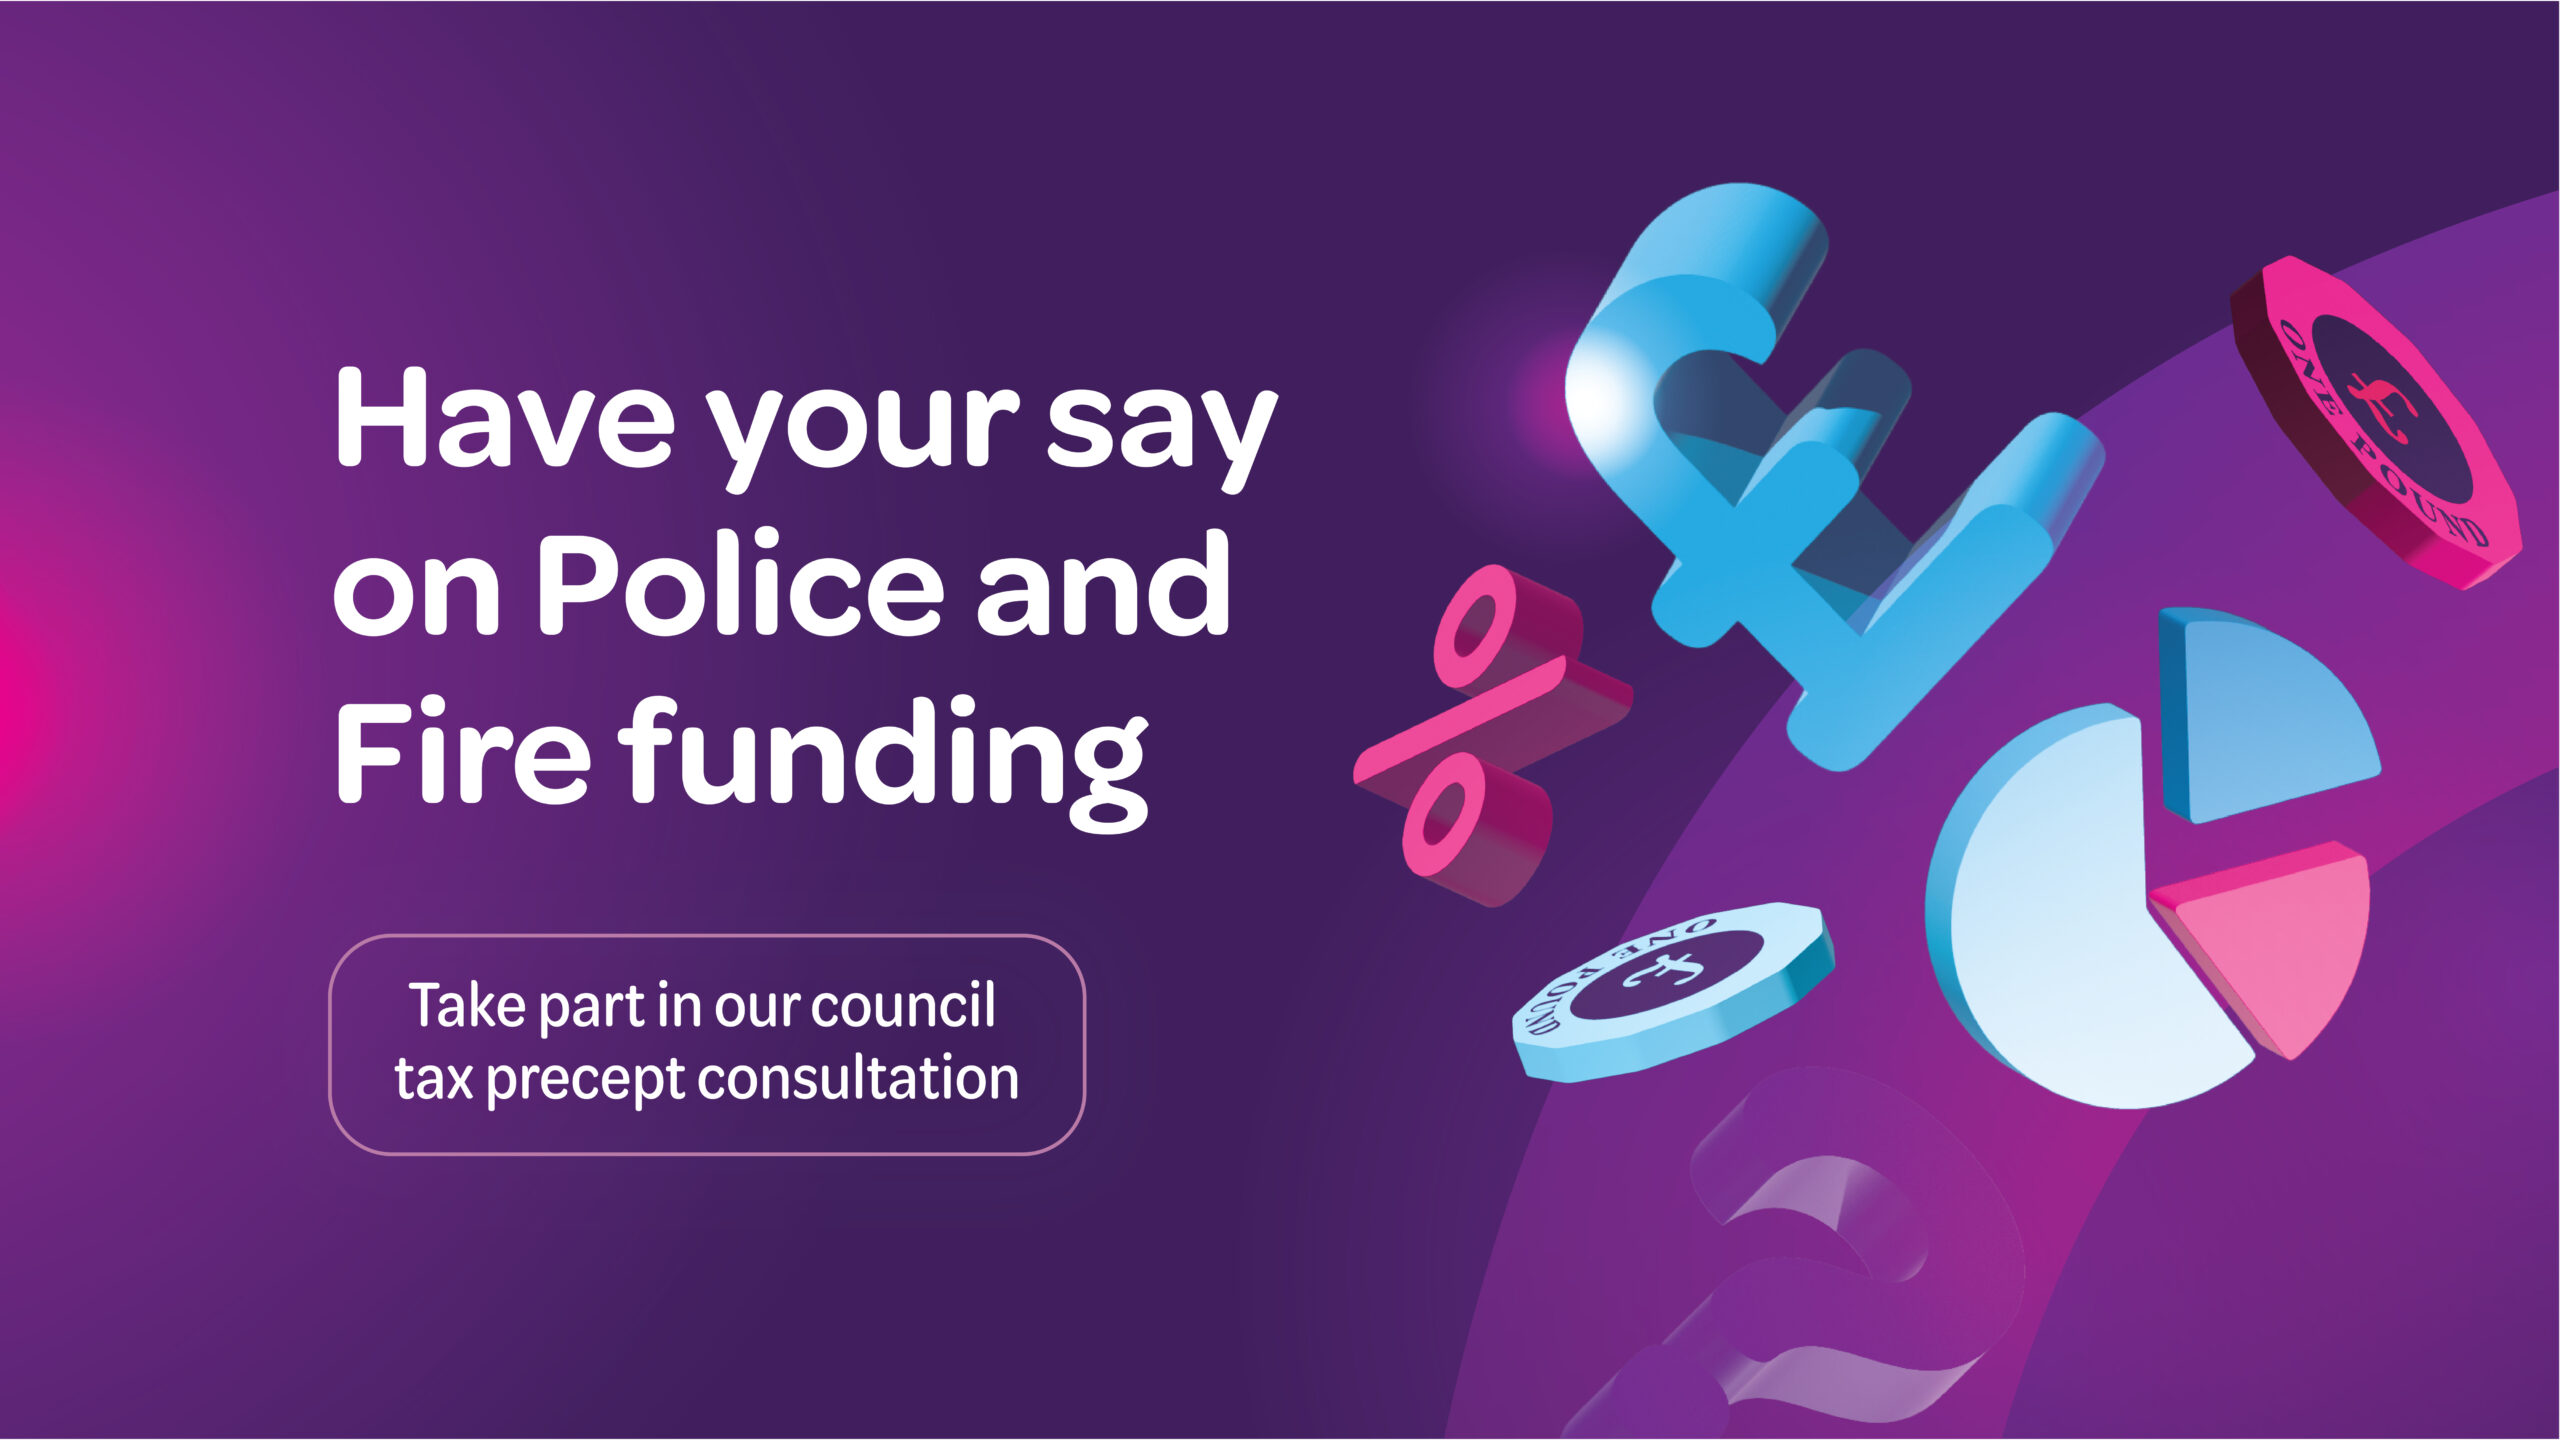 Have your say on Police and Fire funding. Take part in our council tax precept consultation.